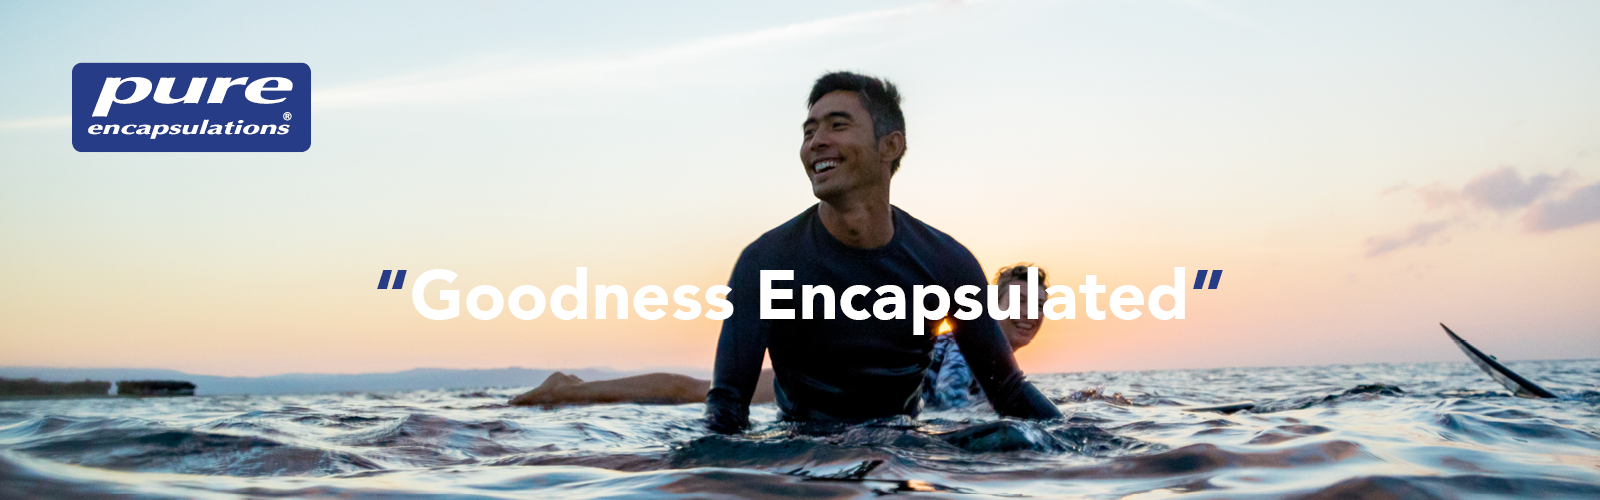 A man surfing in the ocean with a Pure Encapsulation Logo and “Goodness encapsulated” written on the image.